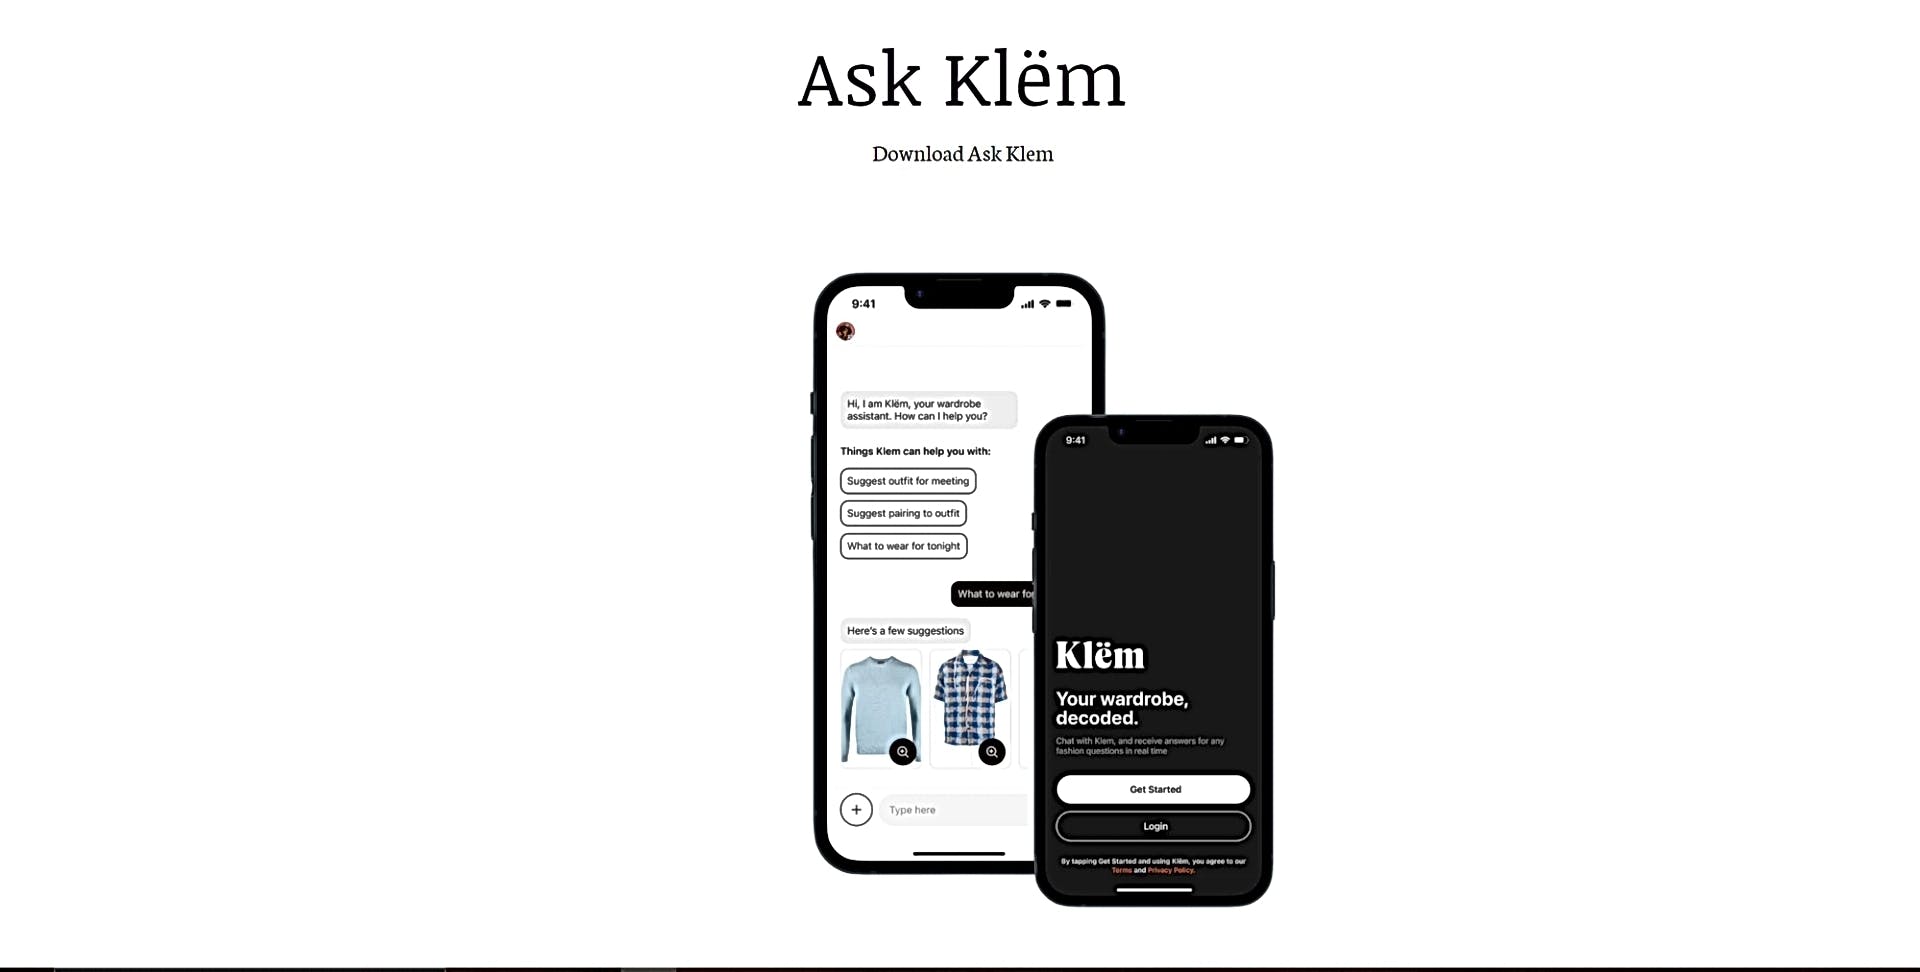 Ask Klem featured